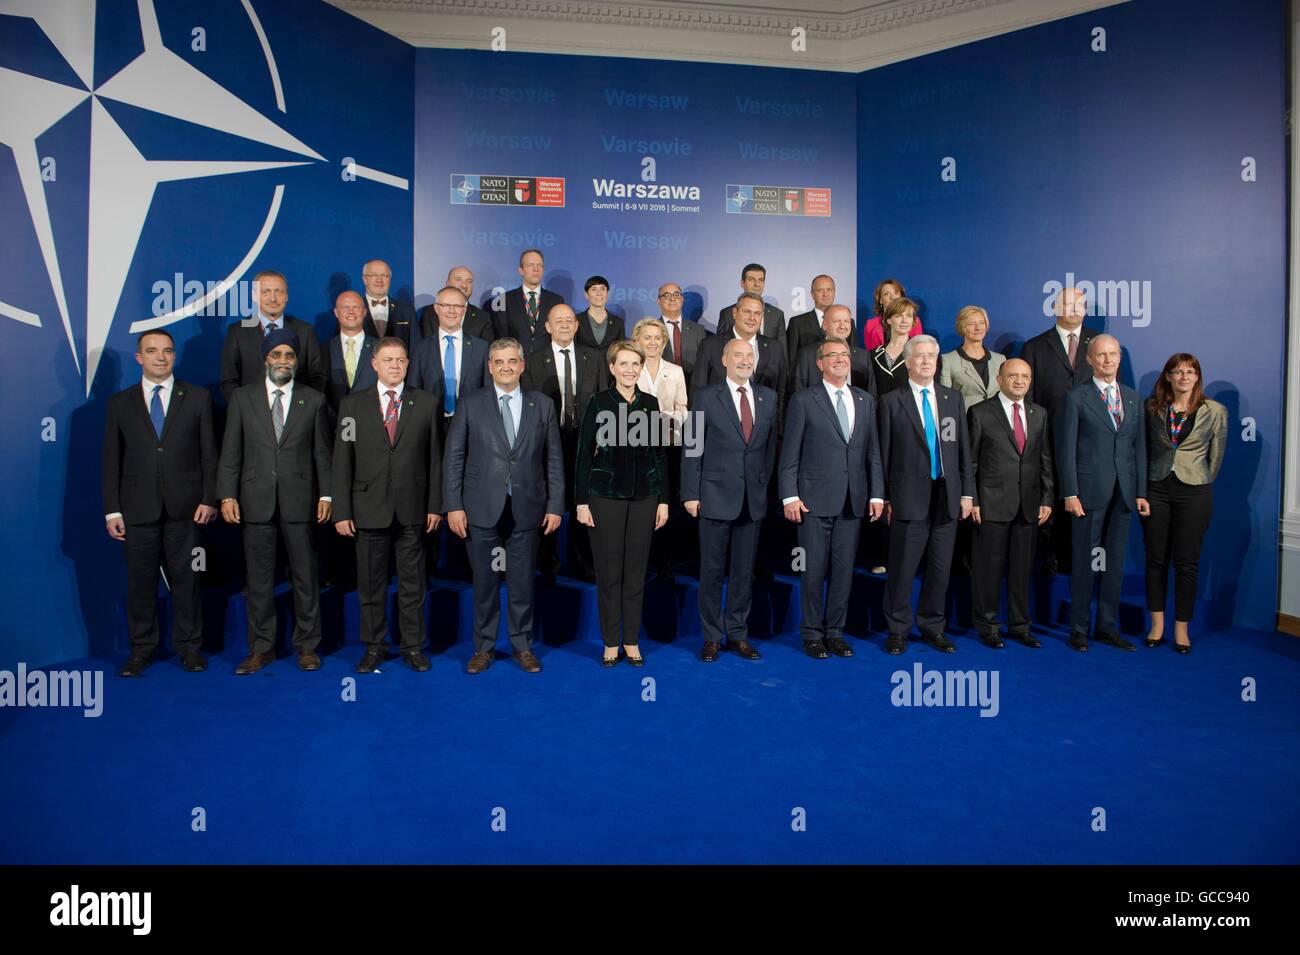 U.S Secretary of Defense Ash Carter poses for a family photo with NATO ministers of defense during the NATO Summit meeting July 8, 2016 in Warsaw, Poland. Stock Photo